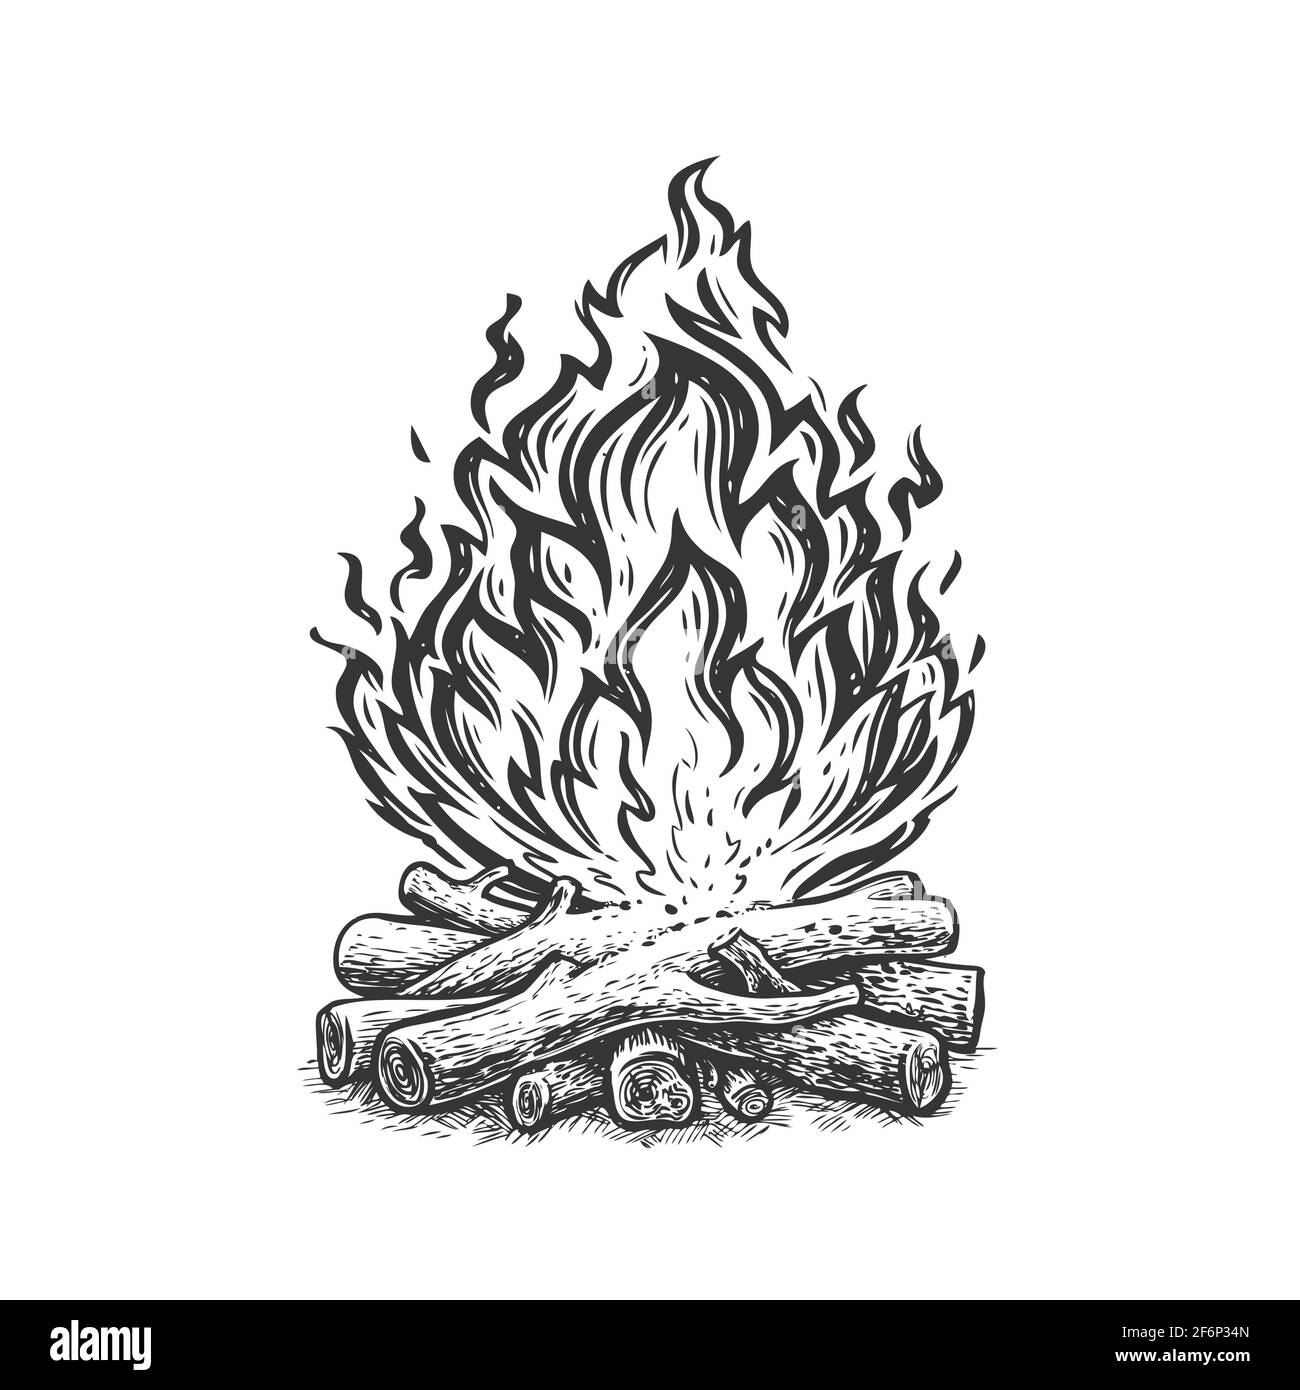 Campfire sketch. Fireplace, flame and firewood burning hand drawn vintage vector illustration Stock Vector